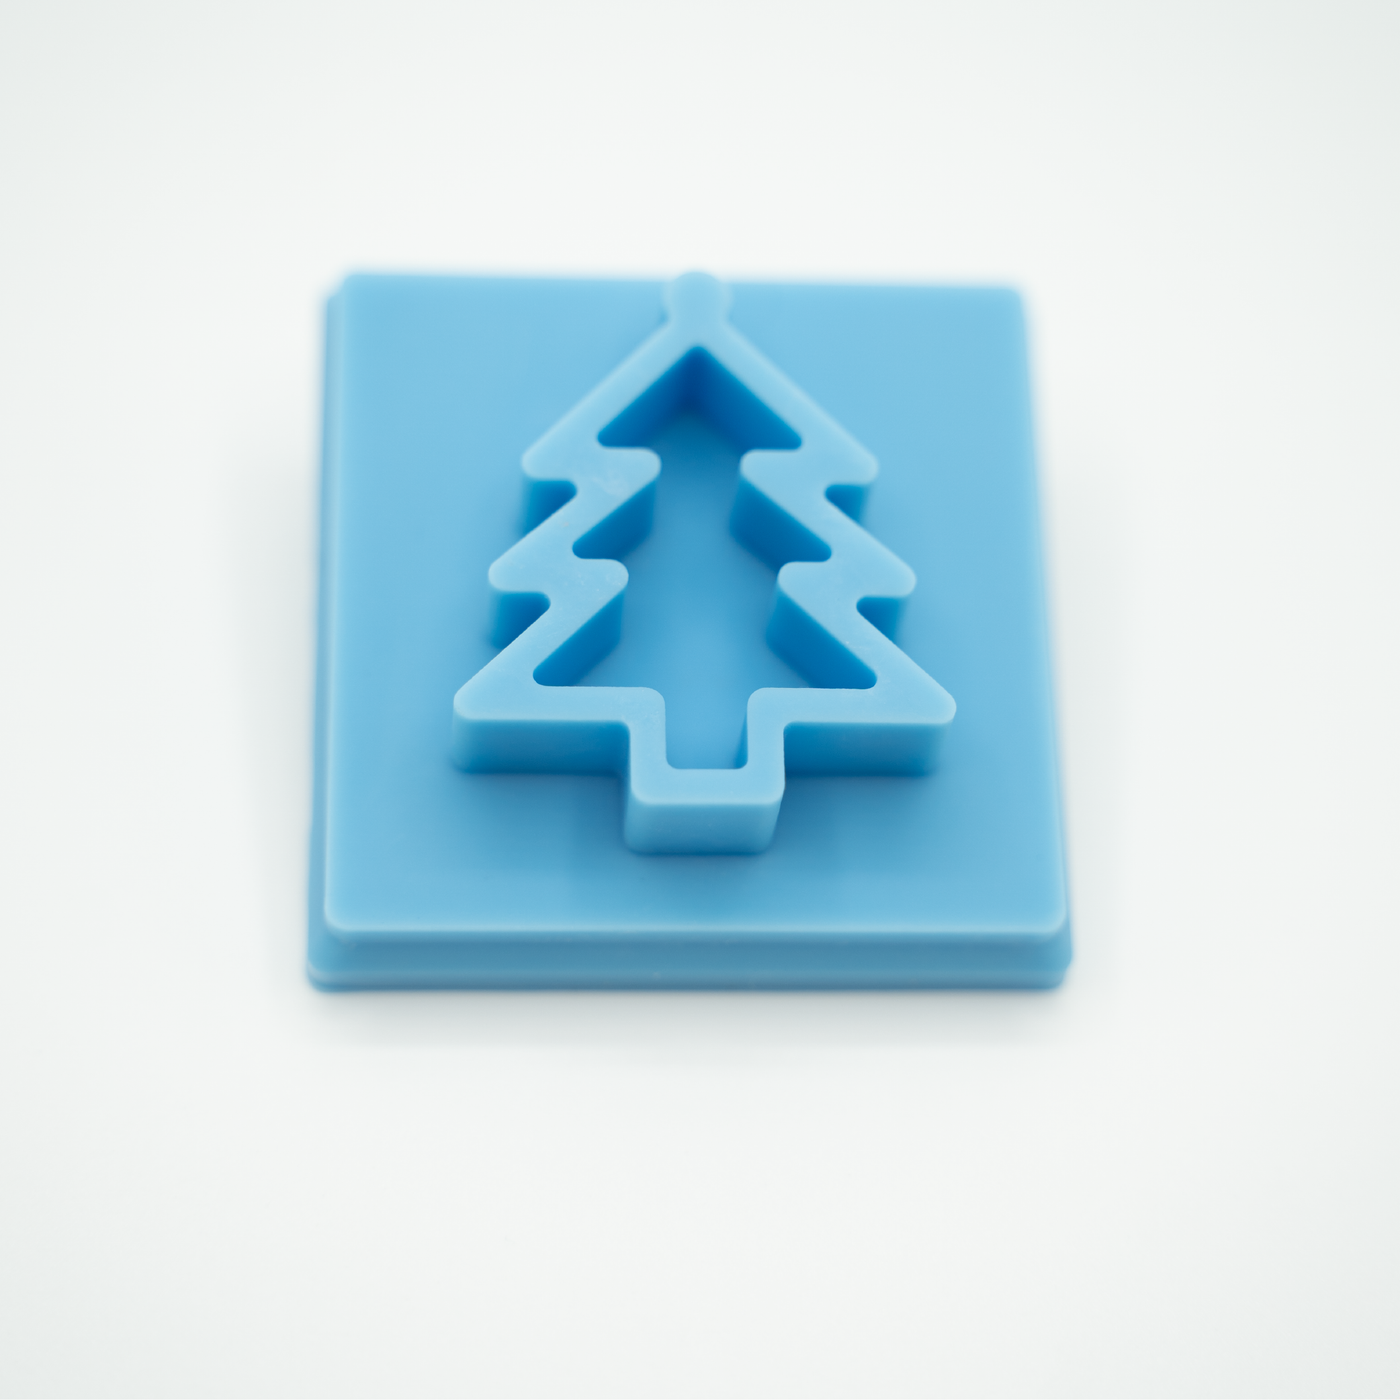 Christmas Tree Inserts - 3 Pack